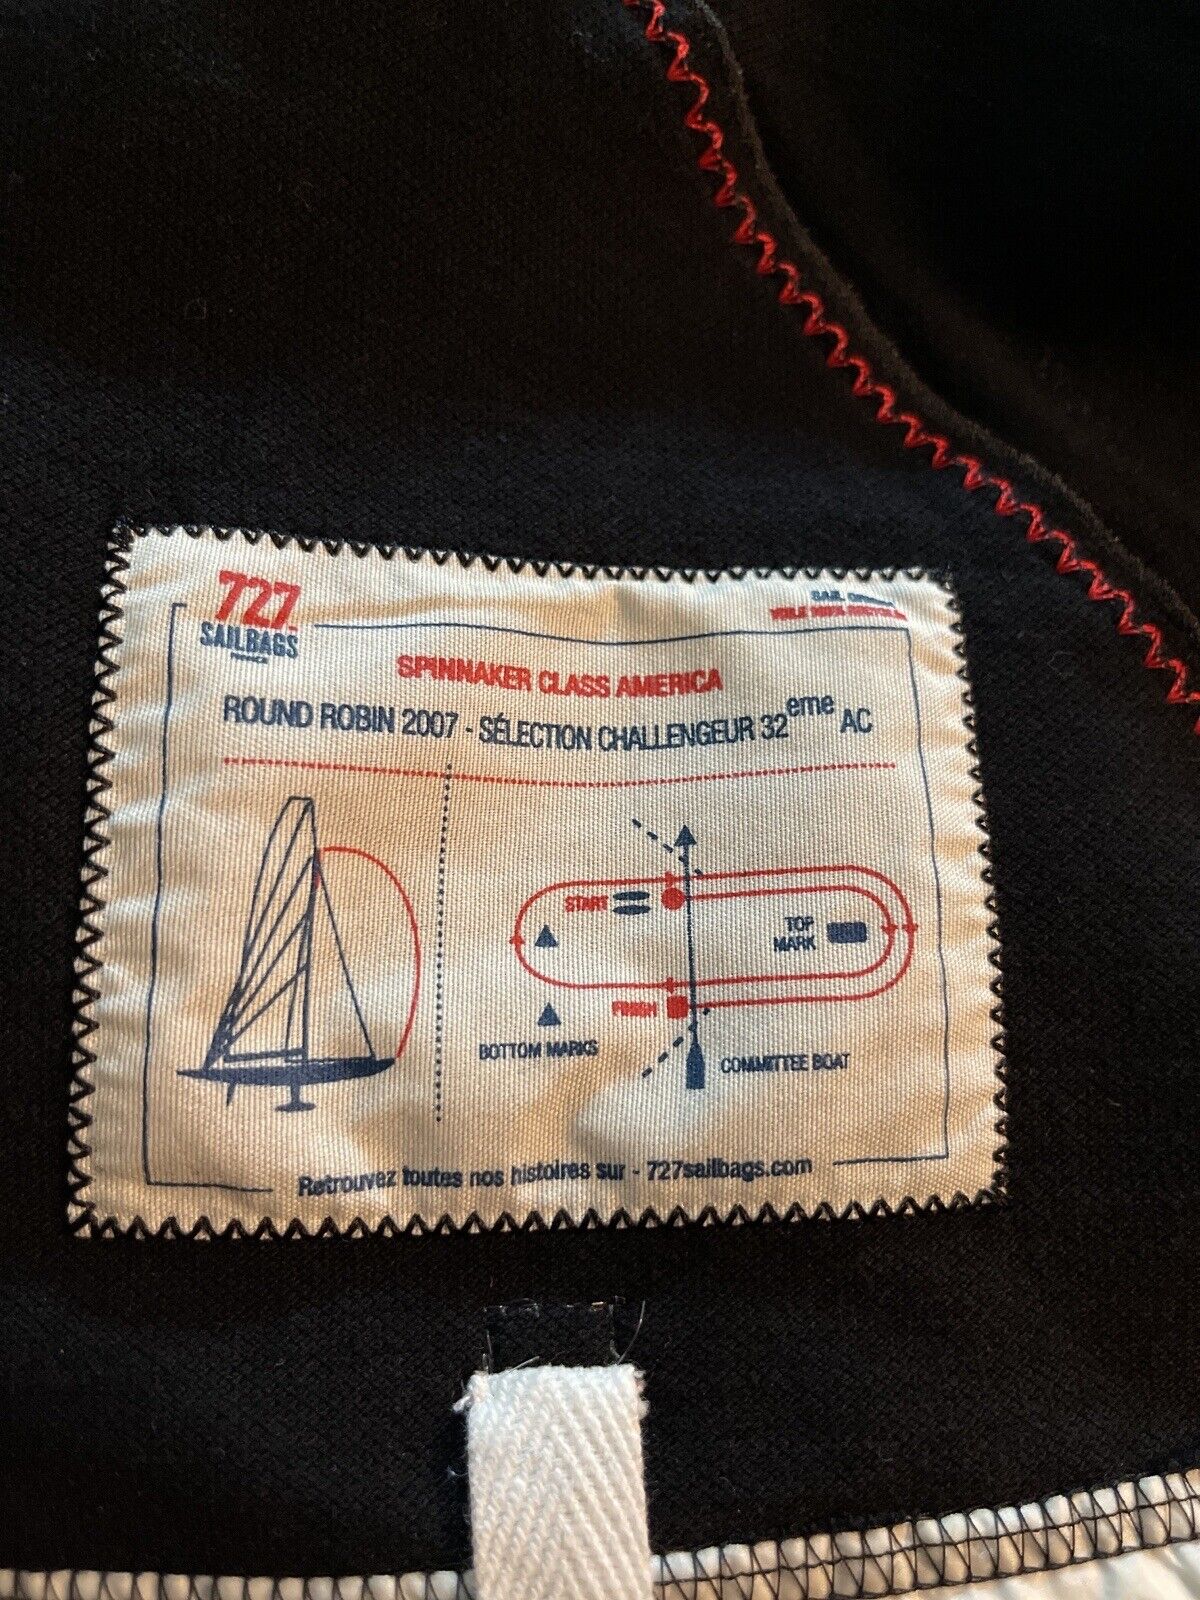 727 Sailbags Mens Polo Size M Long Sleeve Black Recycled Spinnaker